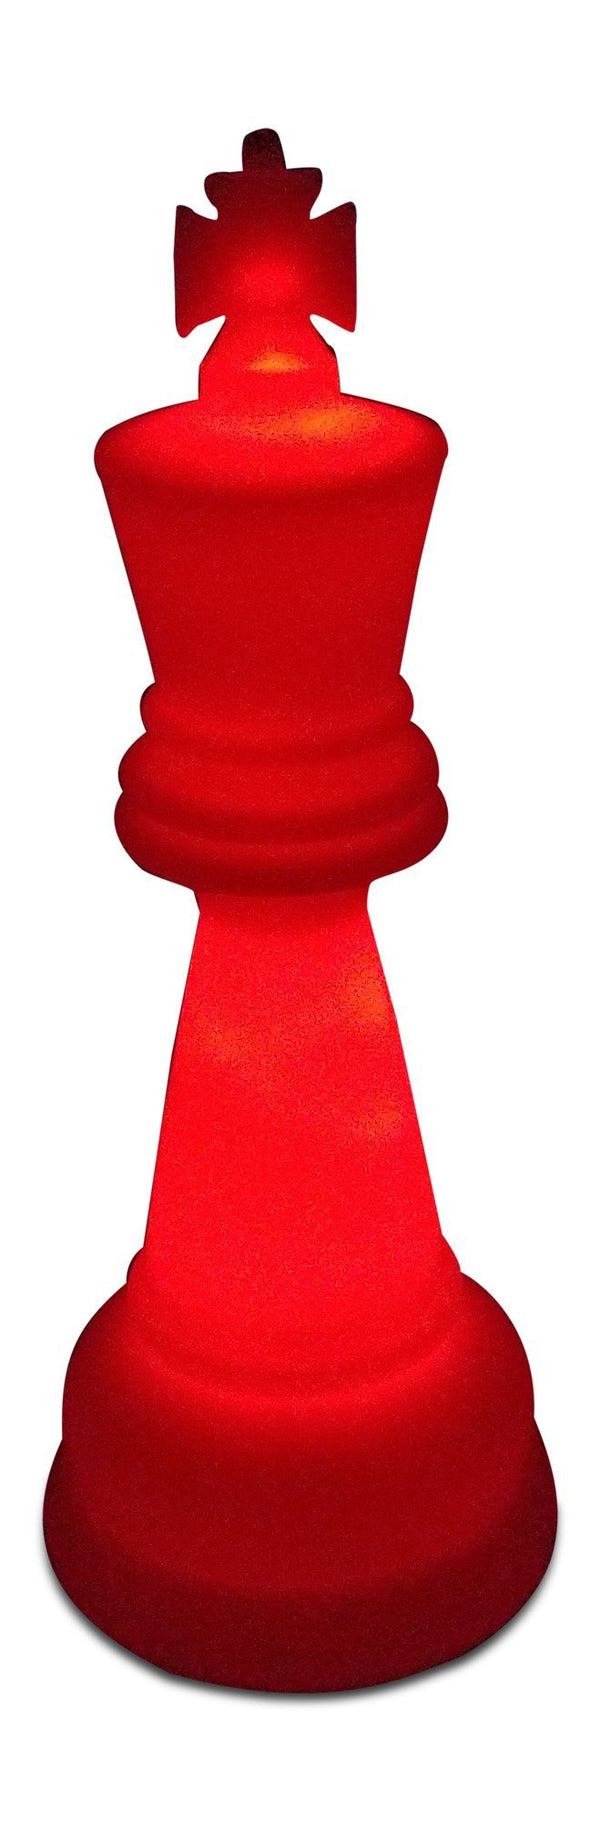 MegaChess 48 Inch Perfect King Light-Up Giant Chess Piece - Red |  | MegaChess.com